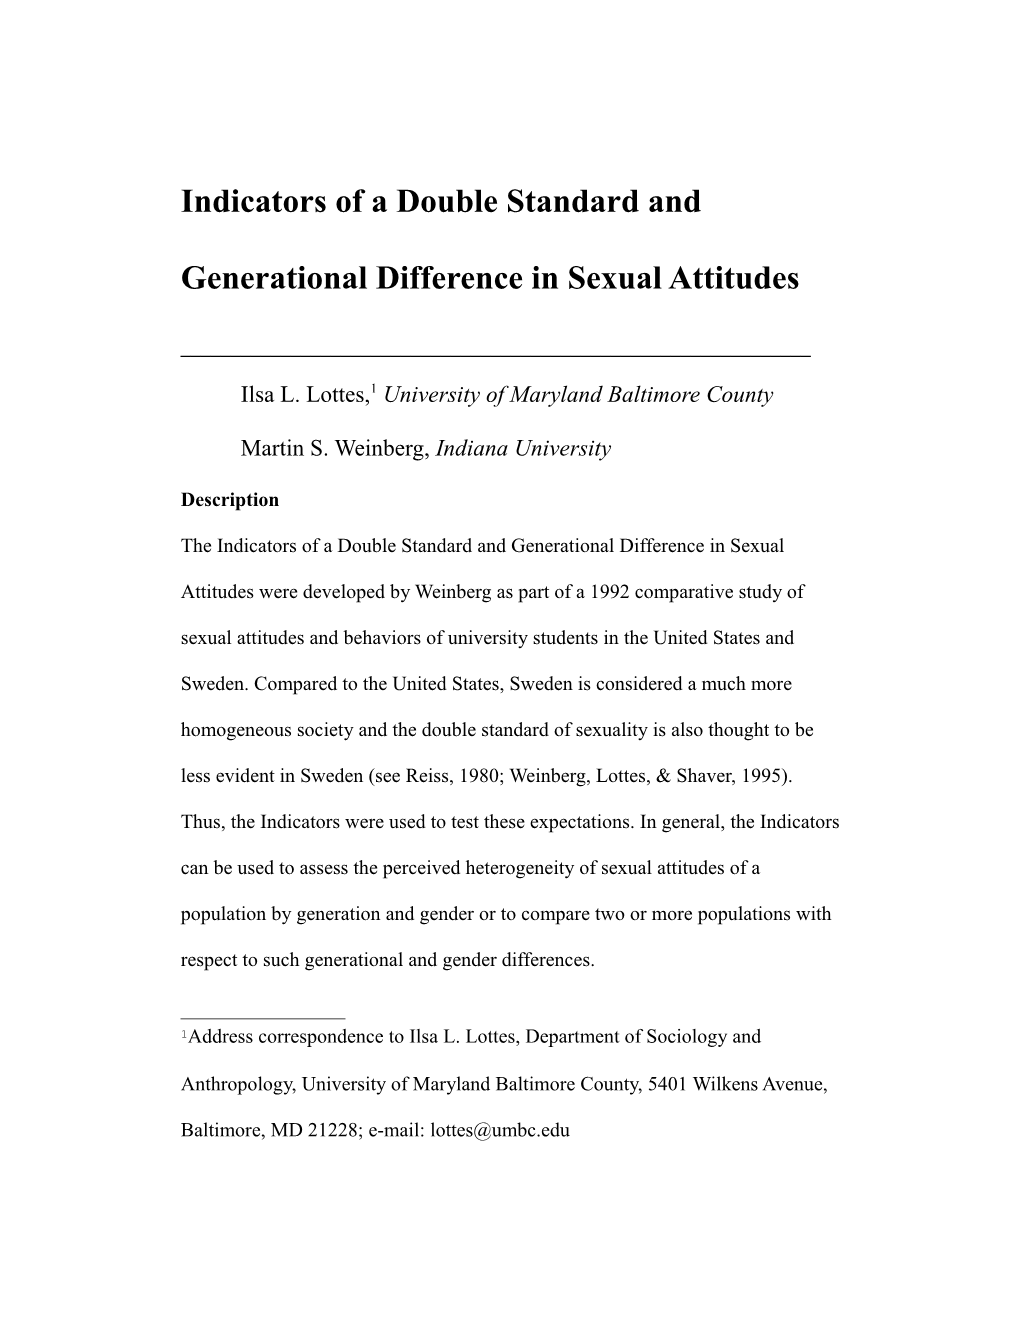 Indicators of Double Standard and Generational Difference in Sexual Attitudes